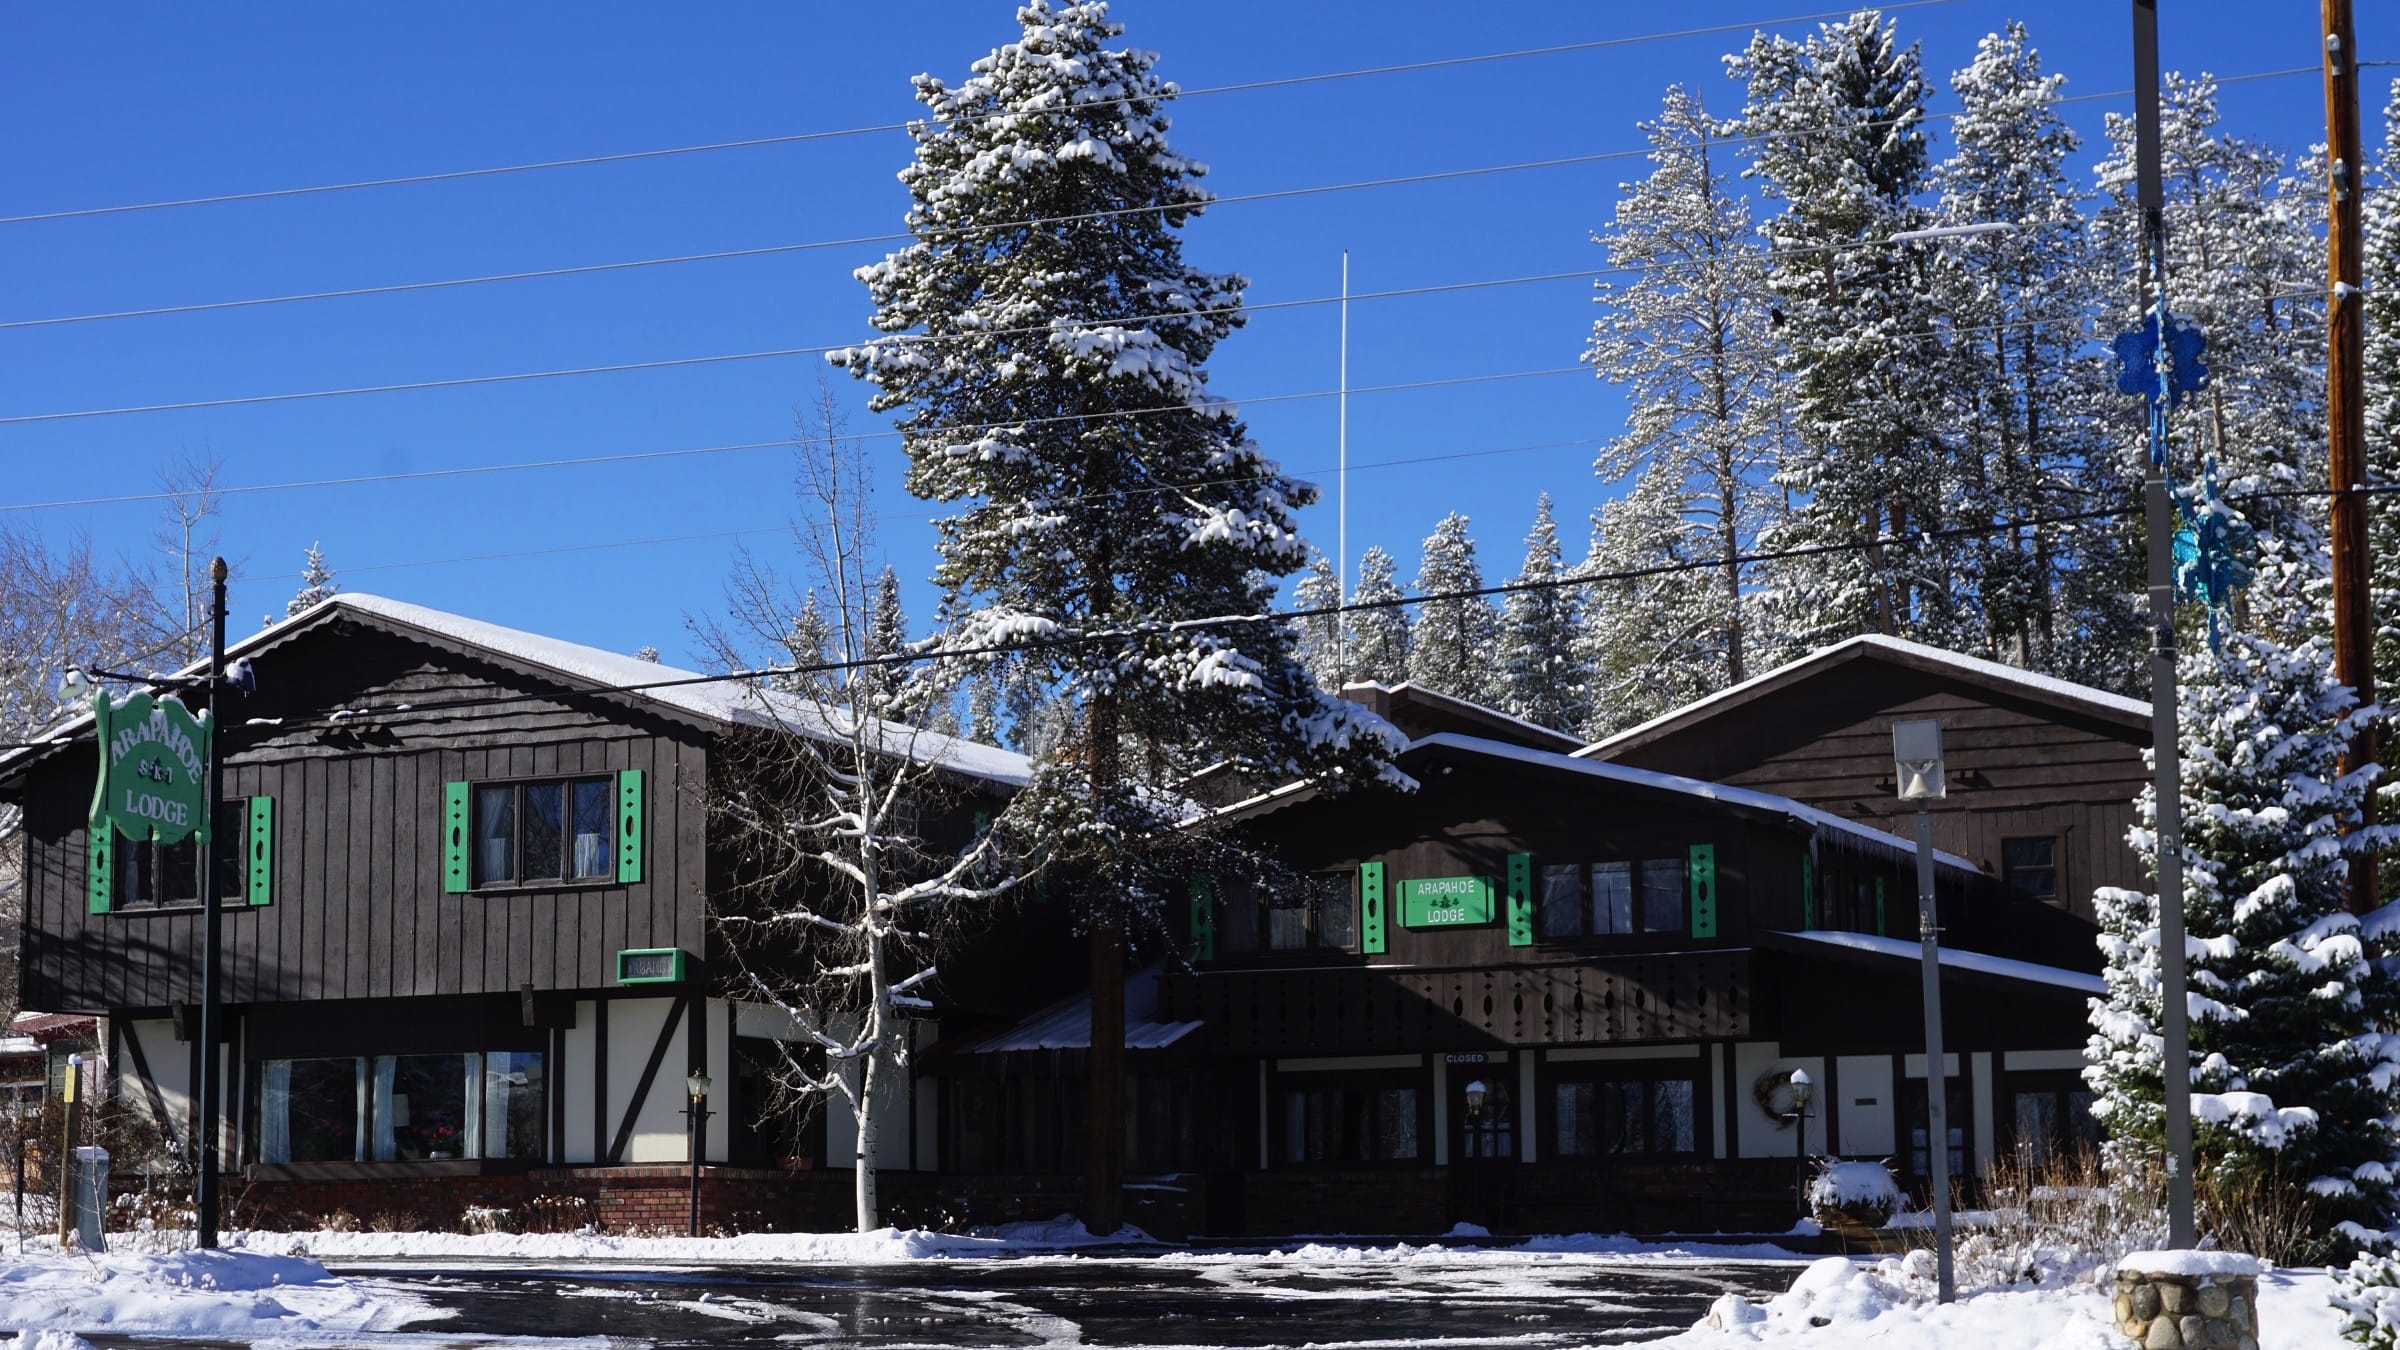 Exterior of Arapahoe Ski Lodge in the Town of Winter Park